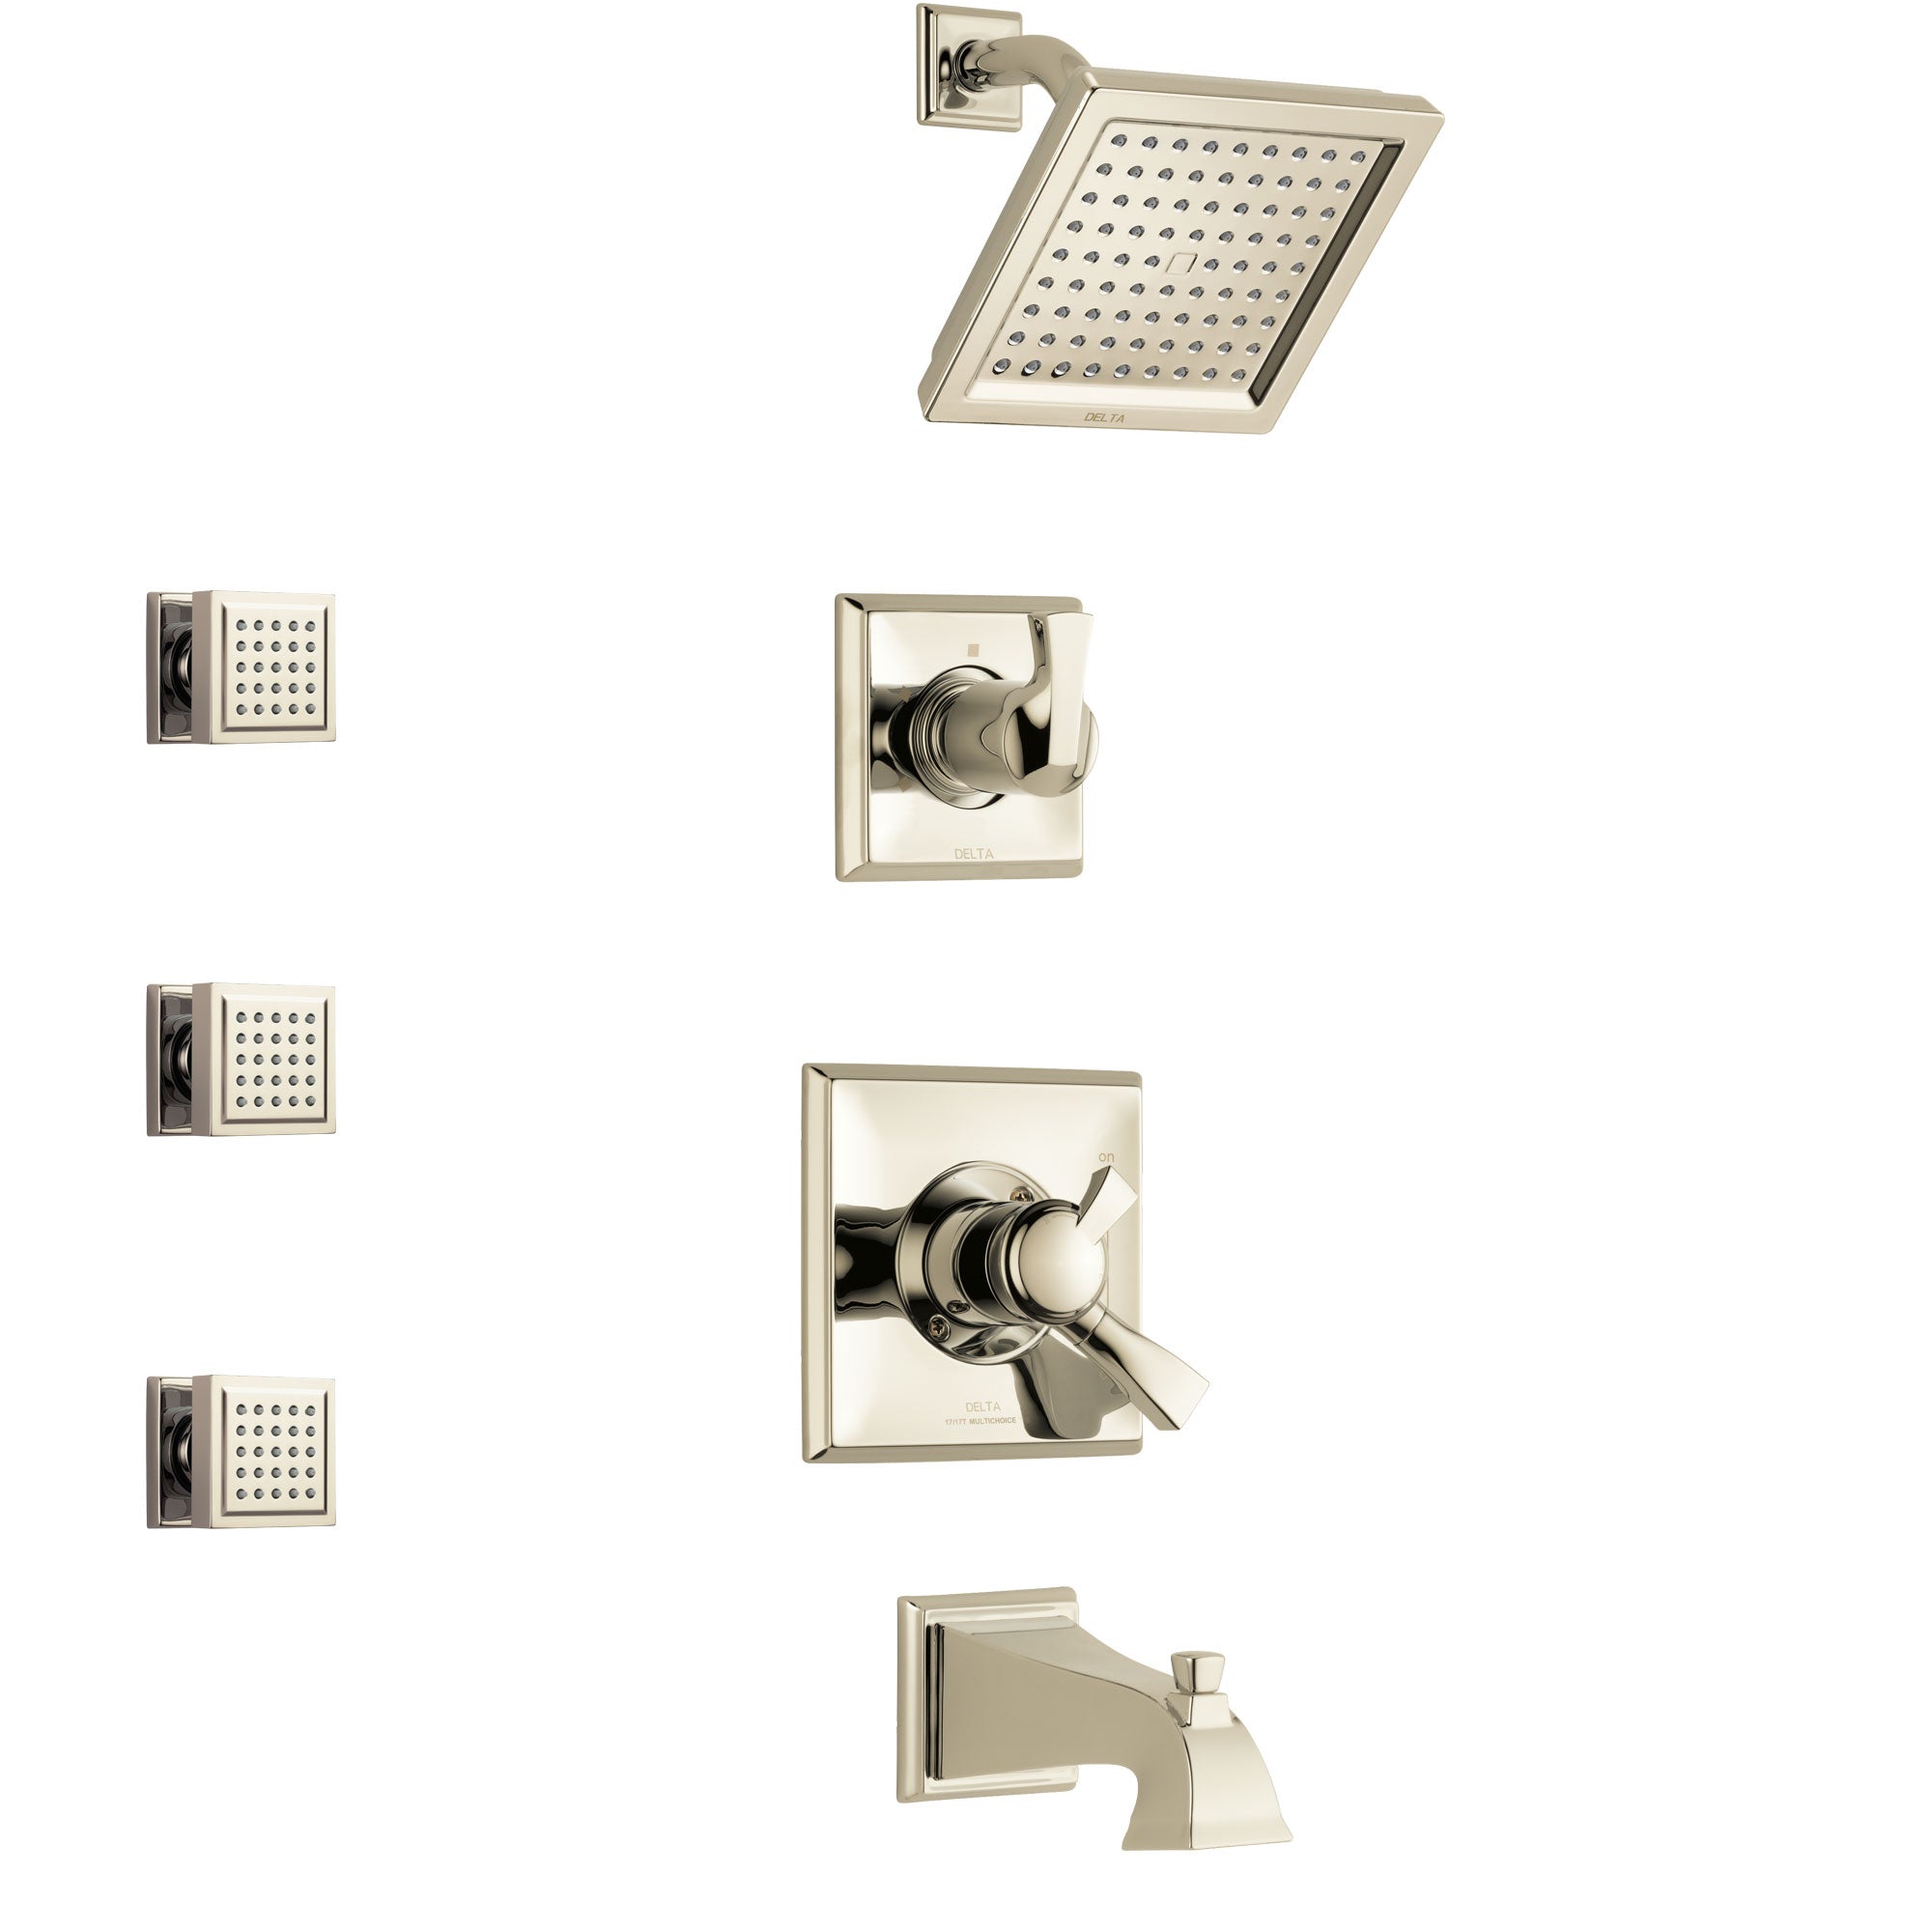 Delta Dryden Polished Nickel Finish Tub and Shower System with Dual Control Handle, 3-Setting Diverter, Showerhead, and 3 Body Sprays SS17451PN1